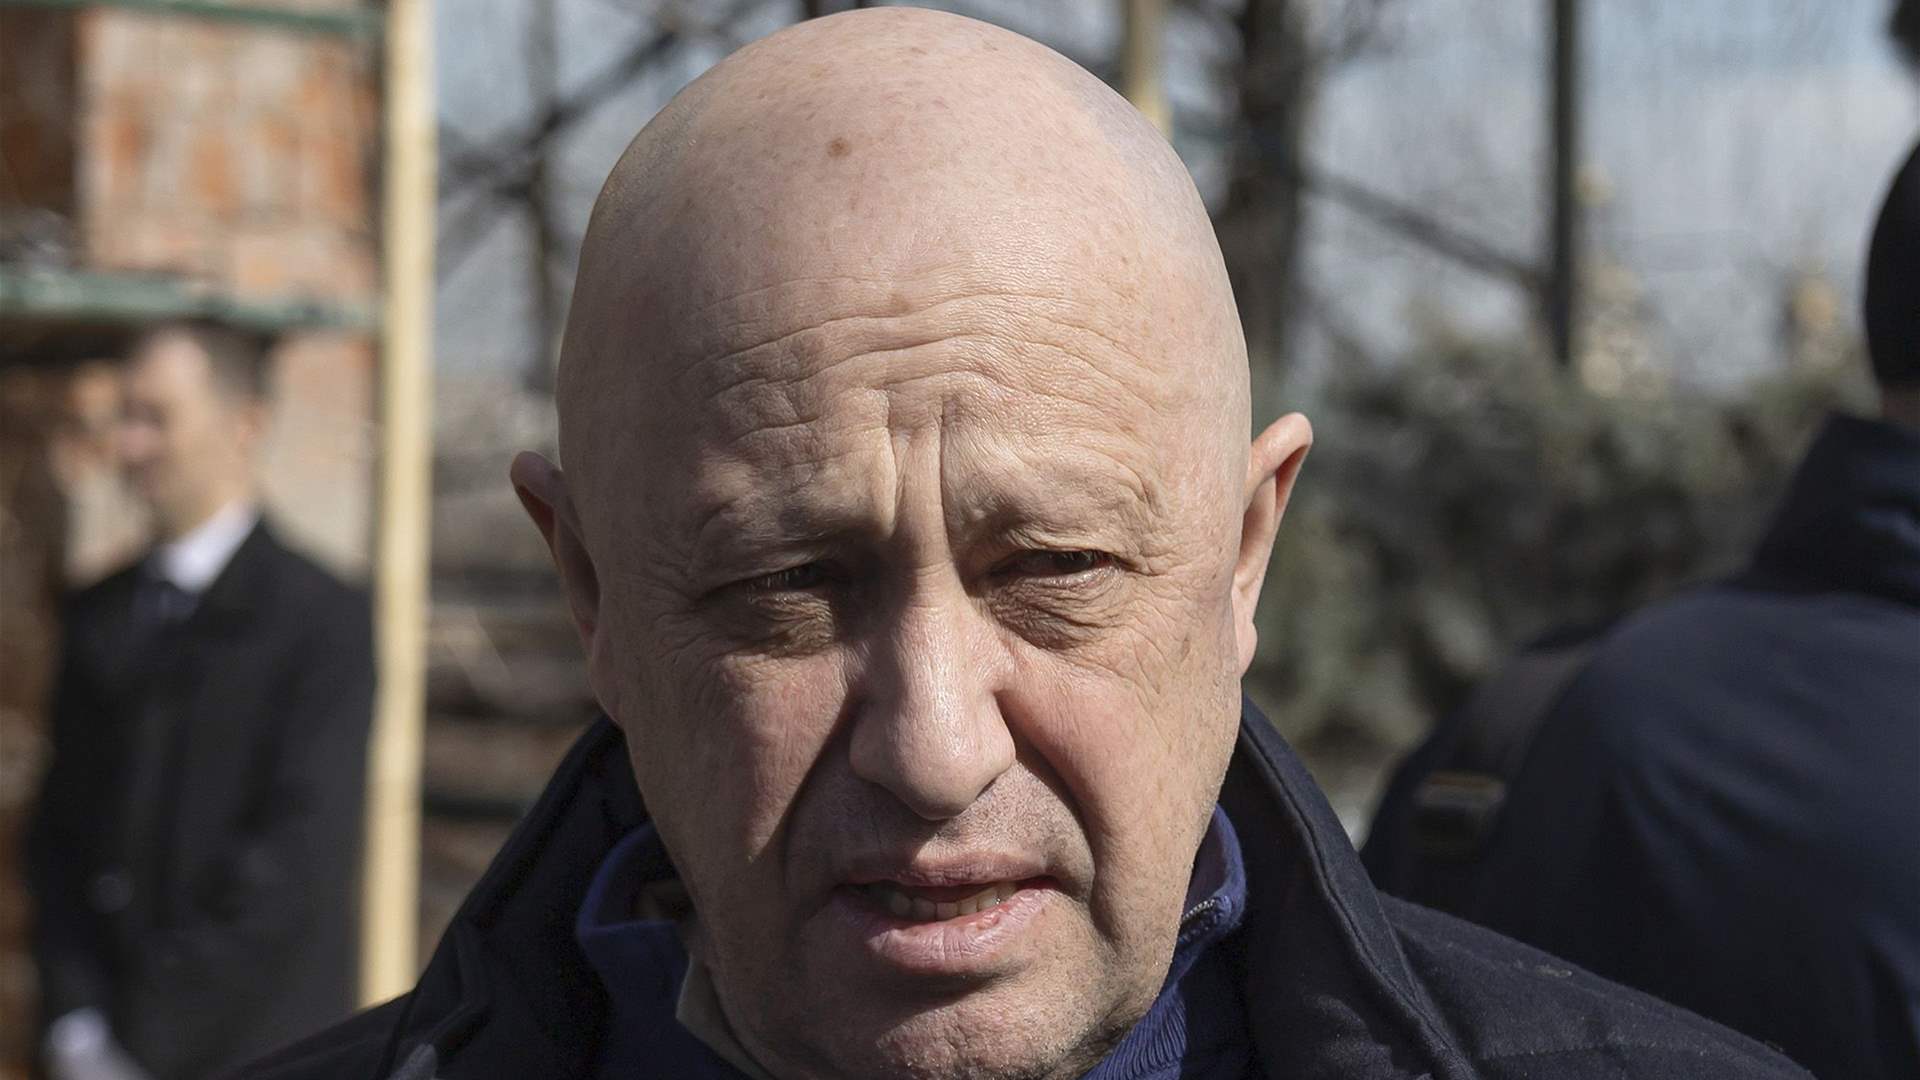 Gold bars, weapons and wigs were found during a search of Prigozhin&#39;s house